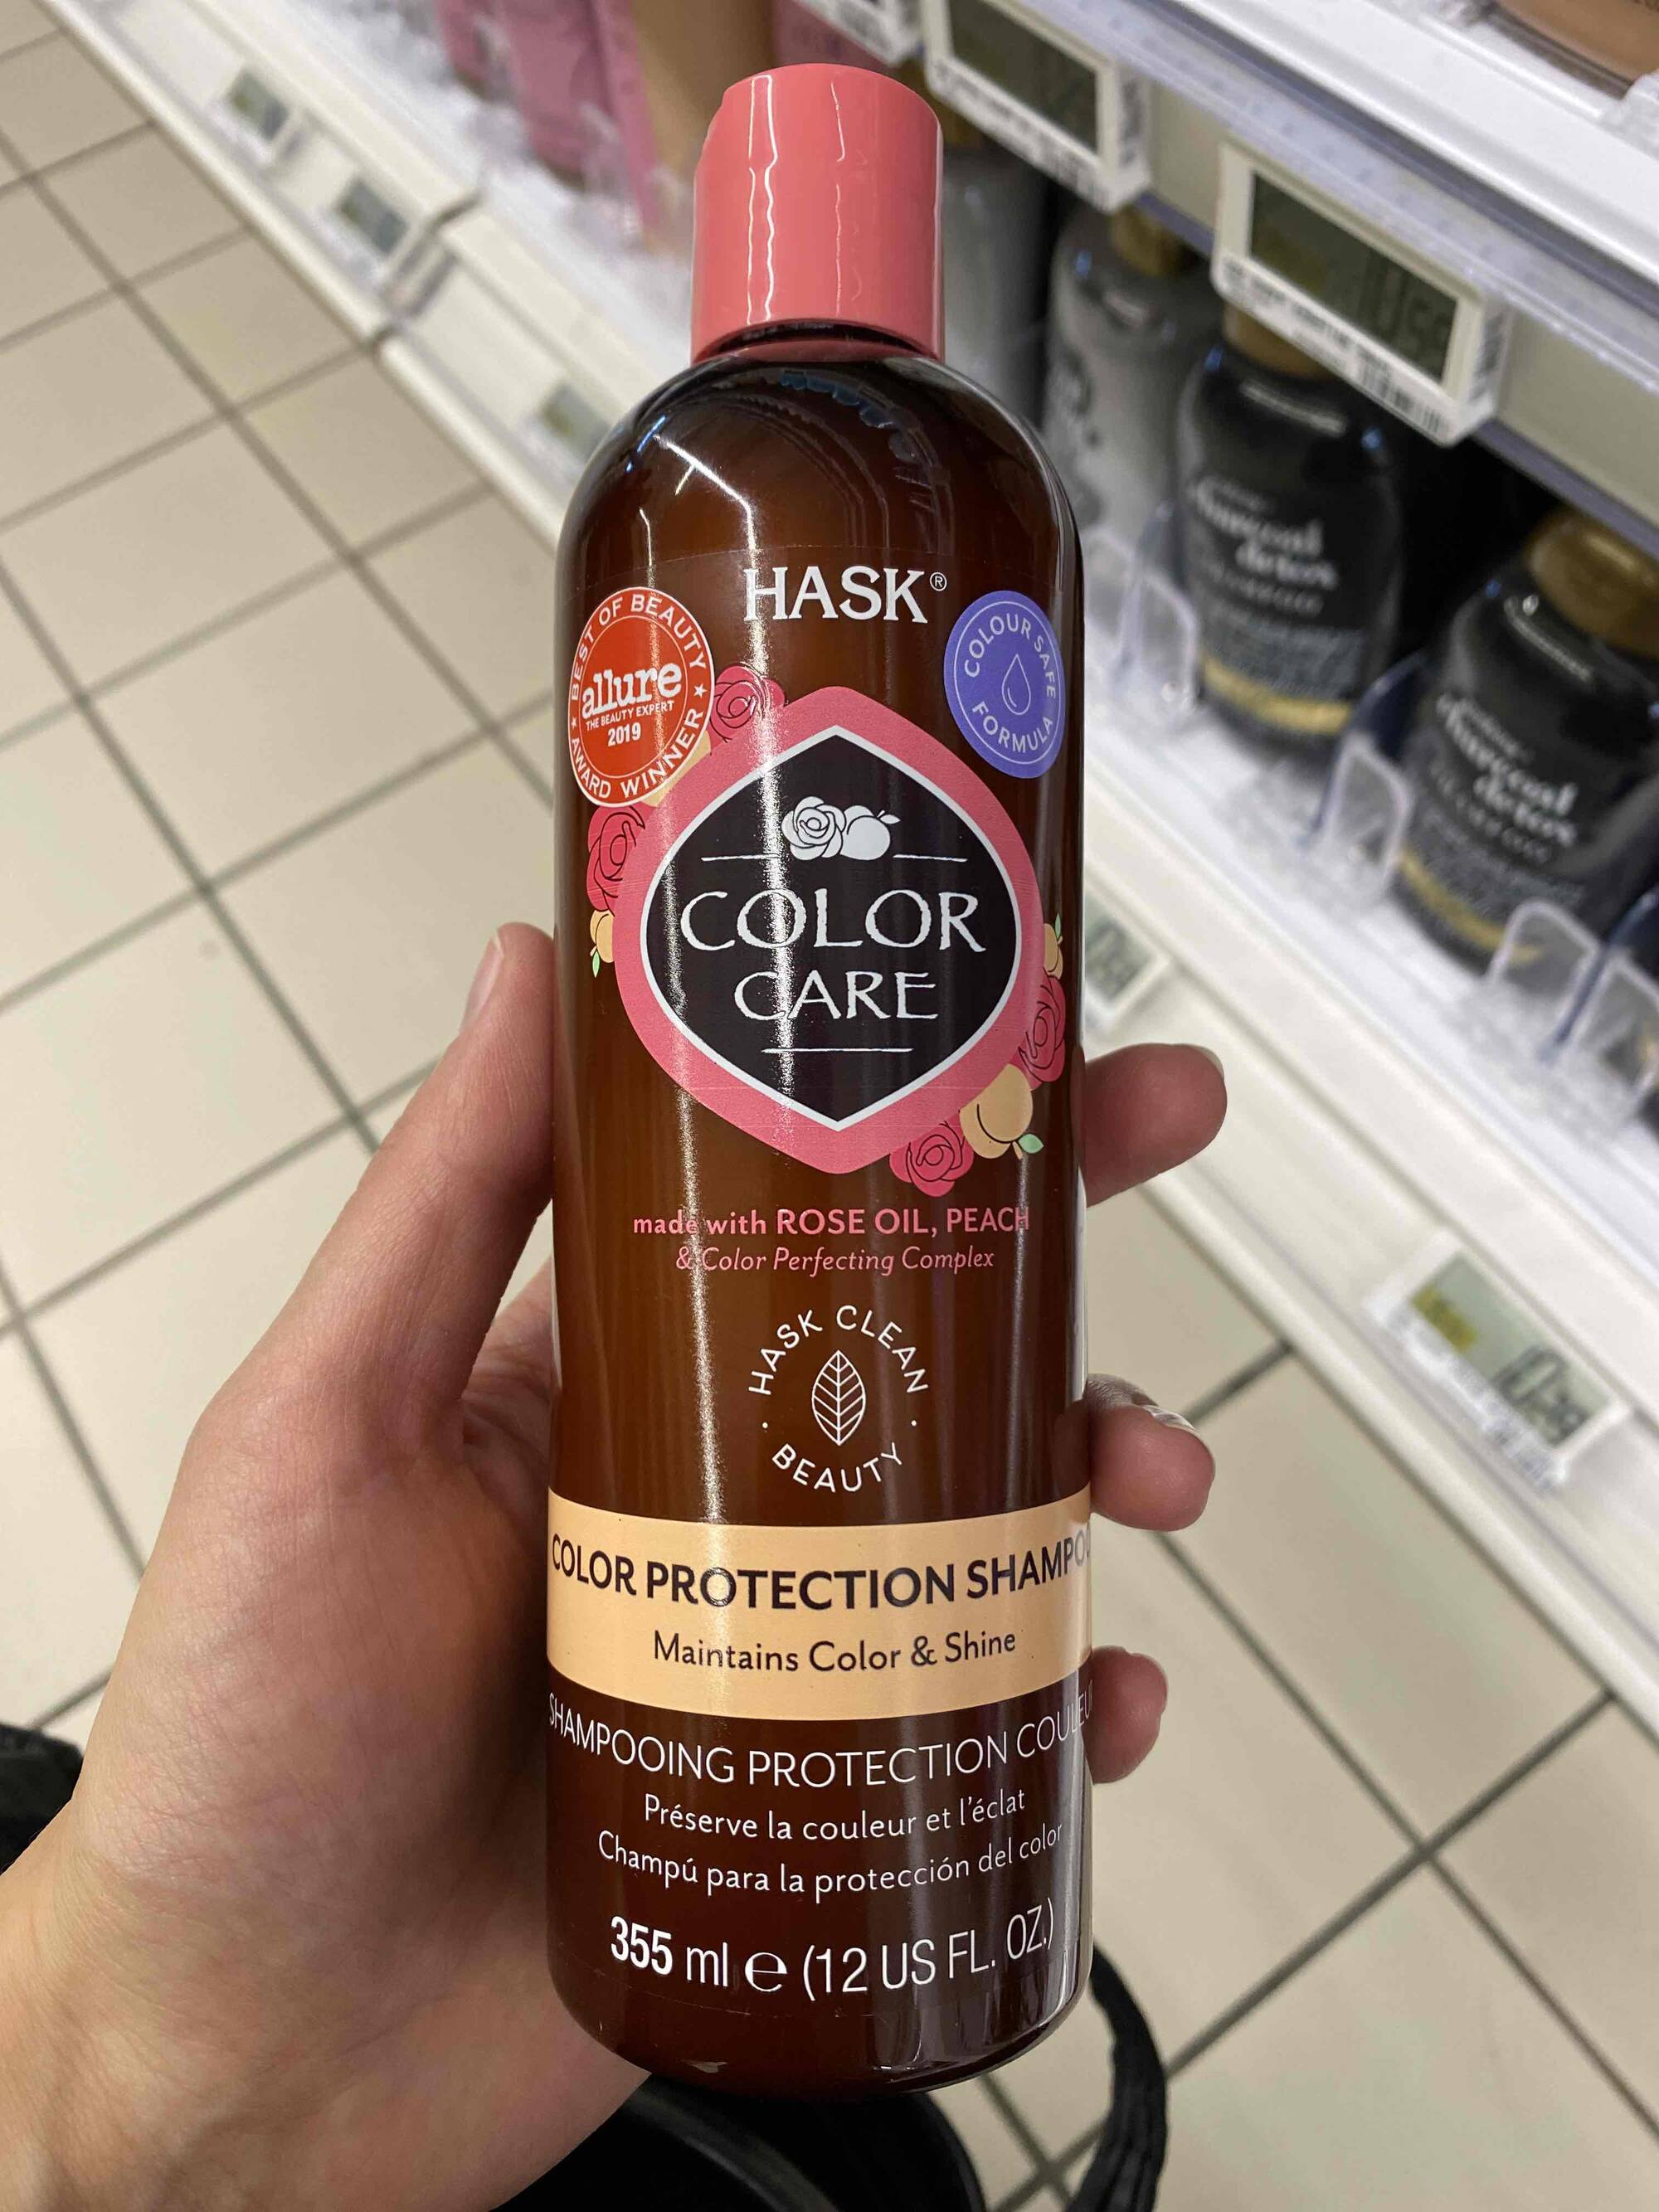 HASK - Color care - Shampooing protection couleur